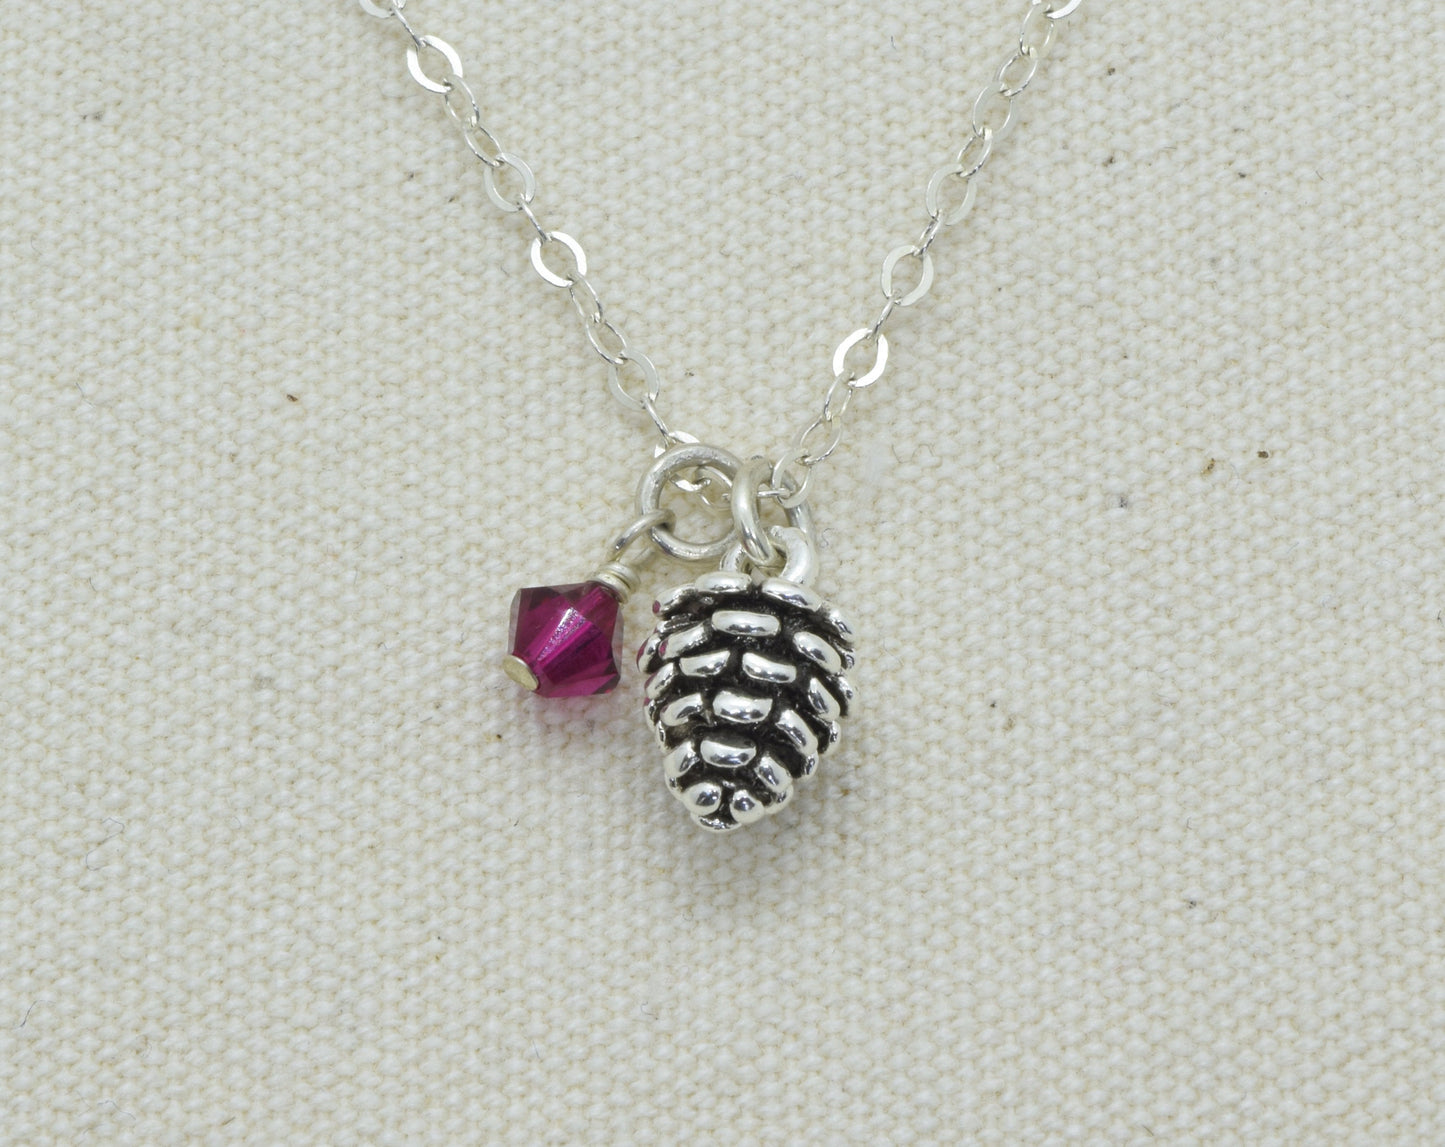 Sterling Silver Pine Cone Charm Necklace